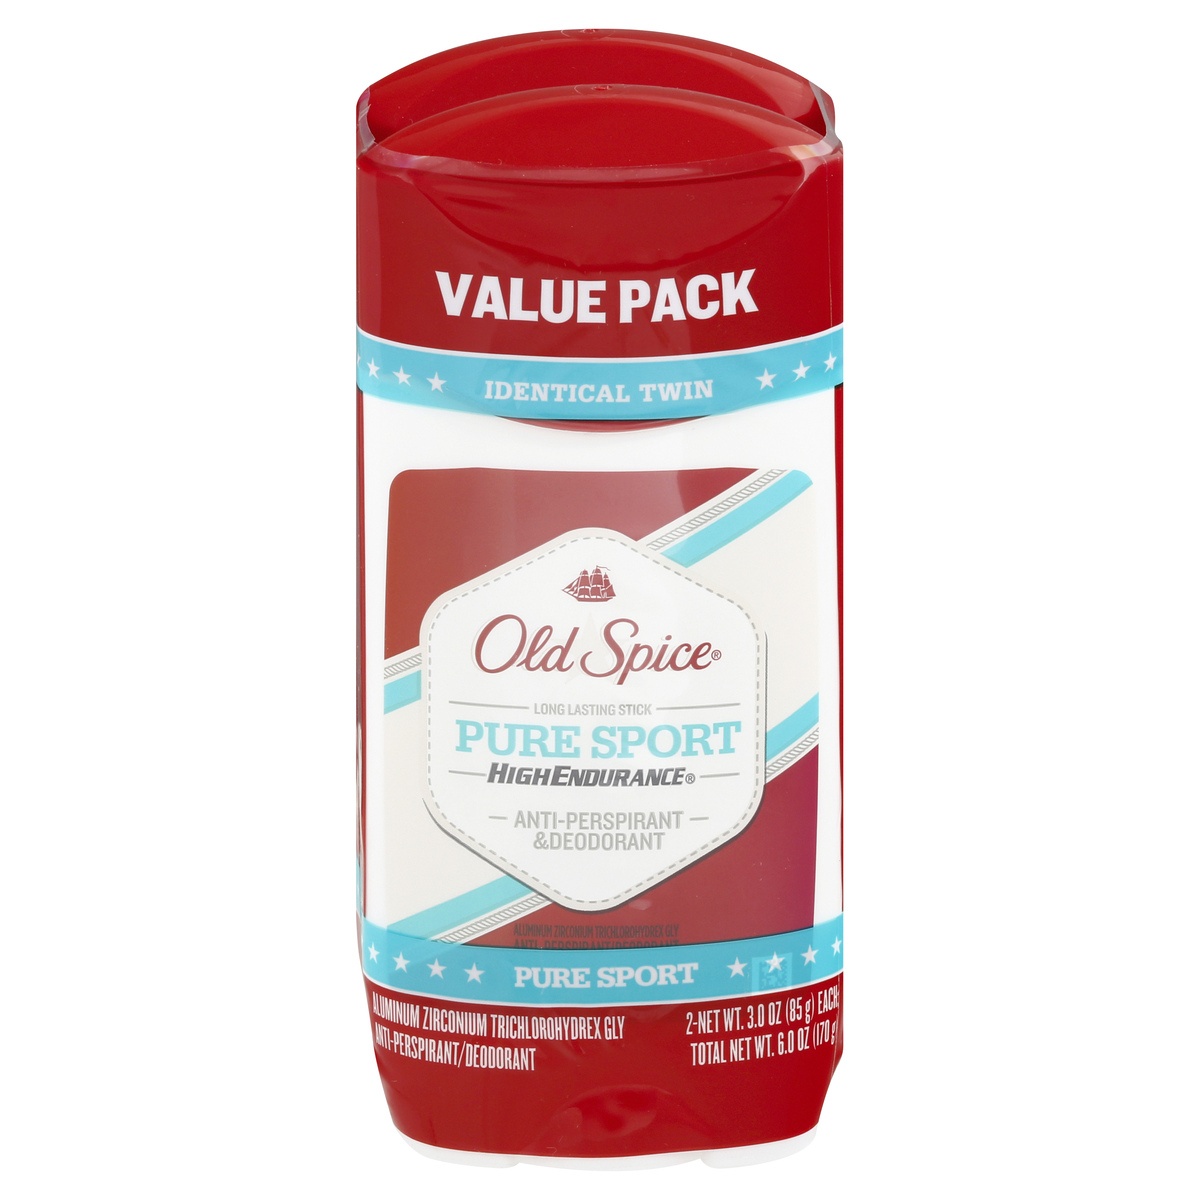 slide 1 of 2, Old Spice High Endurance Anti-Perspirant Deodorant for Men, Pure Sport Scent, Twin Pack, 3.0 Oz. each, 2 ct; 3 oz